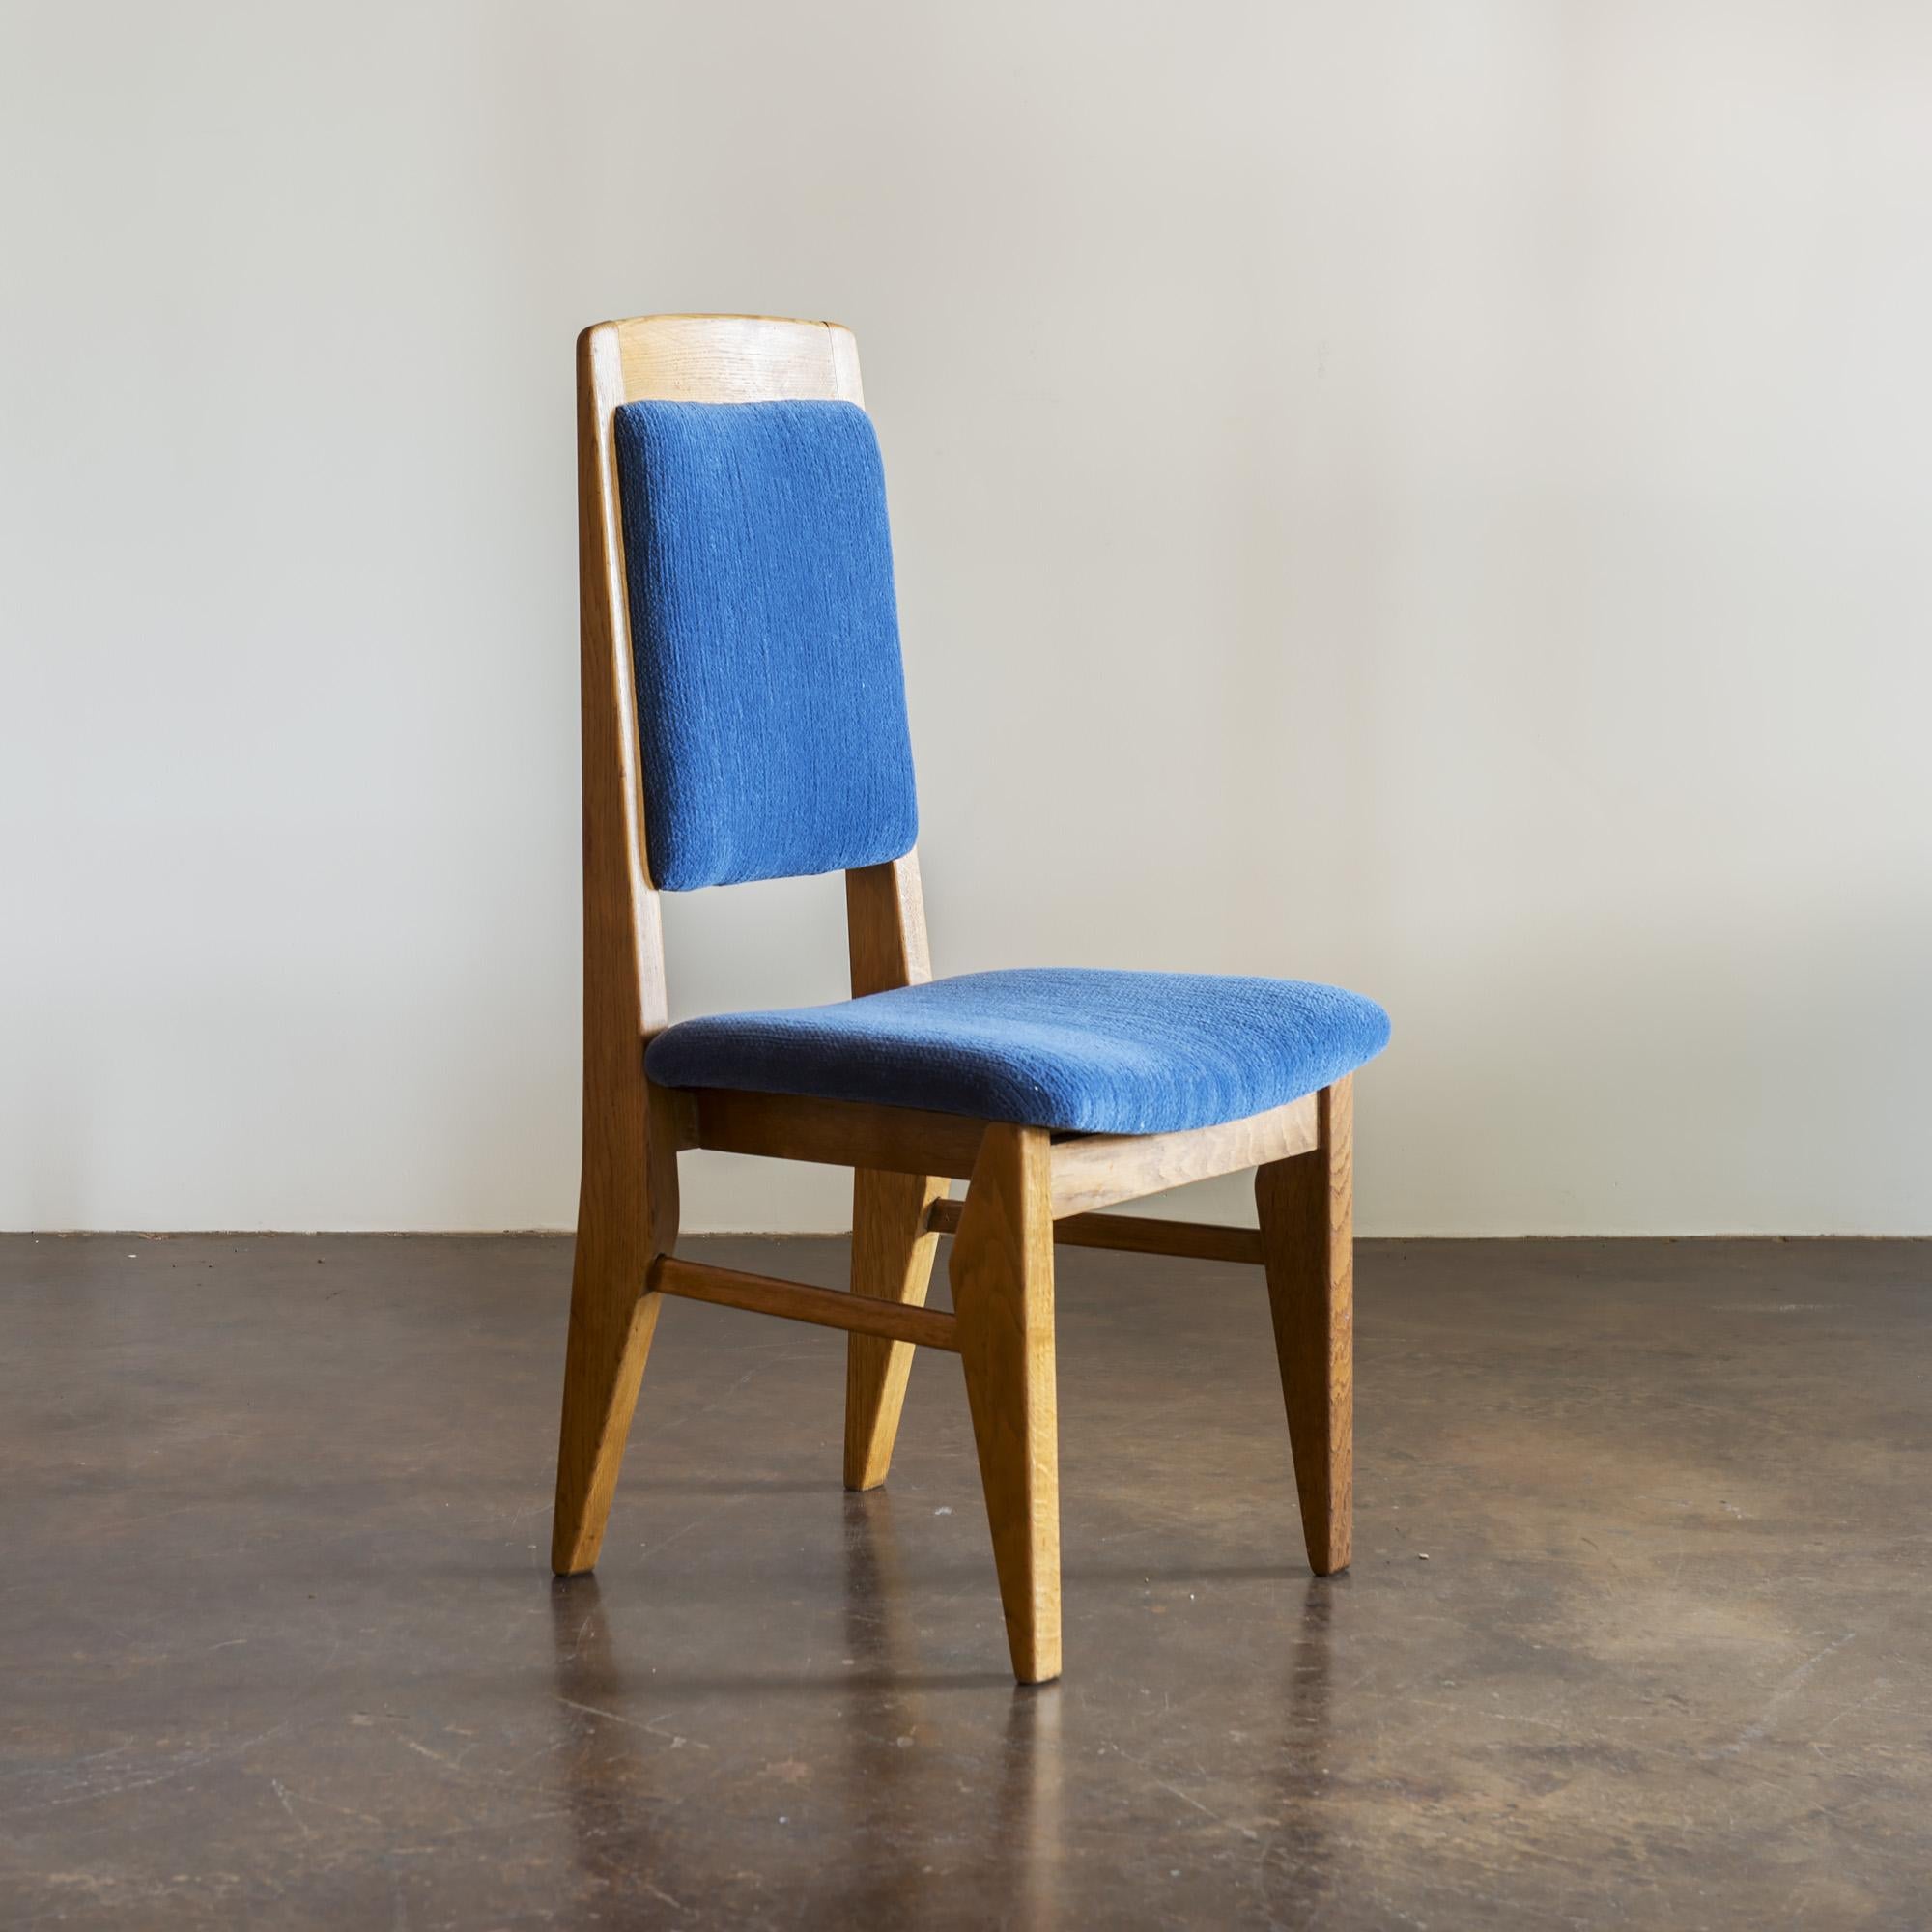 Set of six elemental Guillerme et Chambron dining chairs in golden oak, restored and recently reupholstered in Holland and Sherry Merino Cadet blue wool chenille.